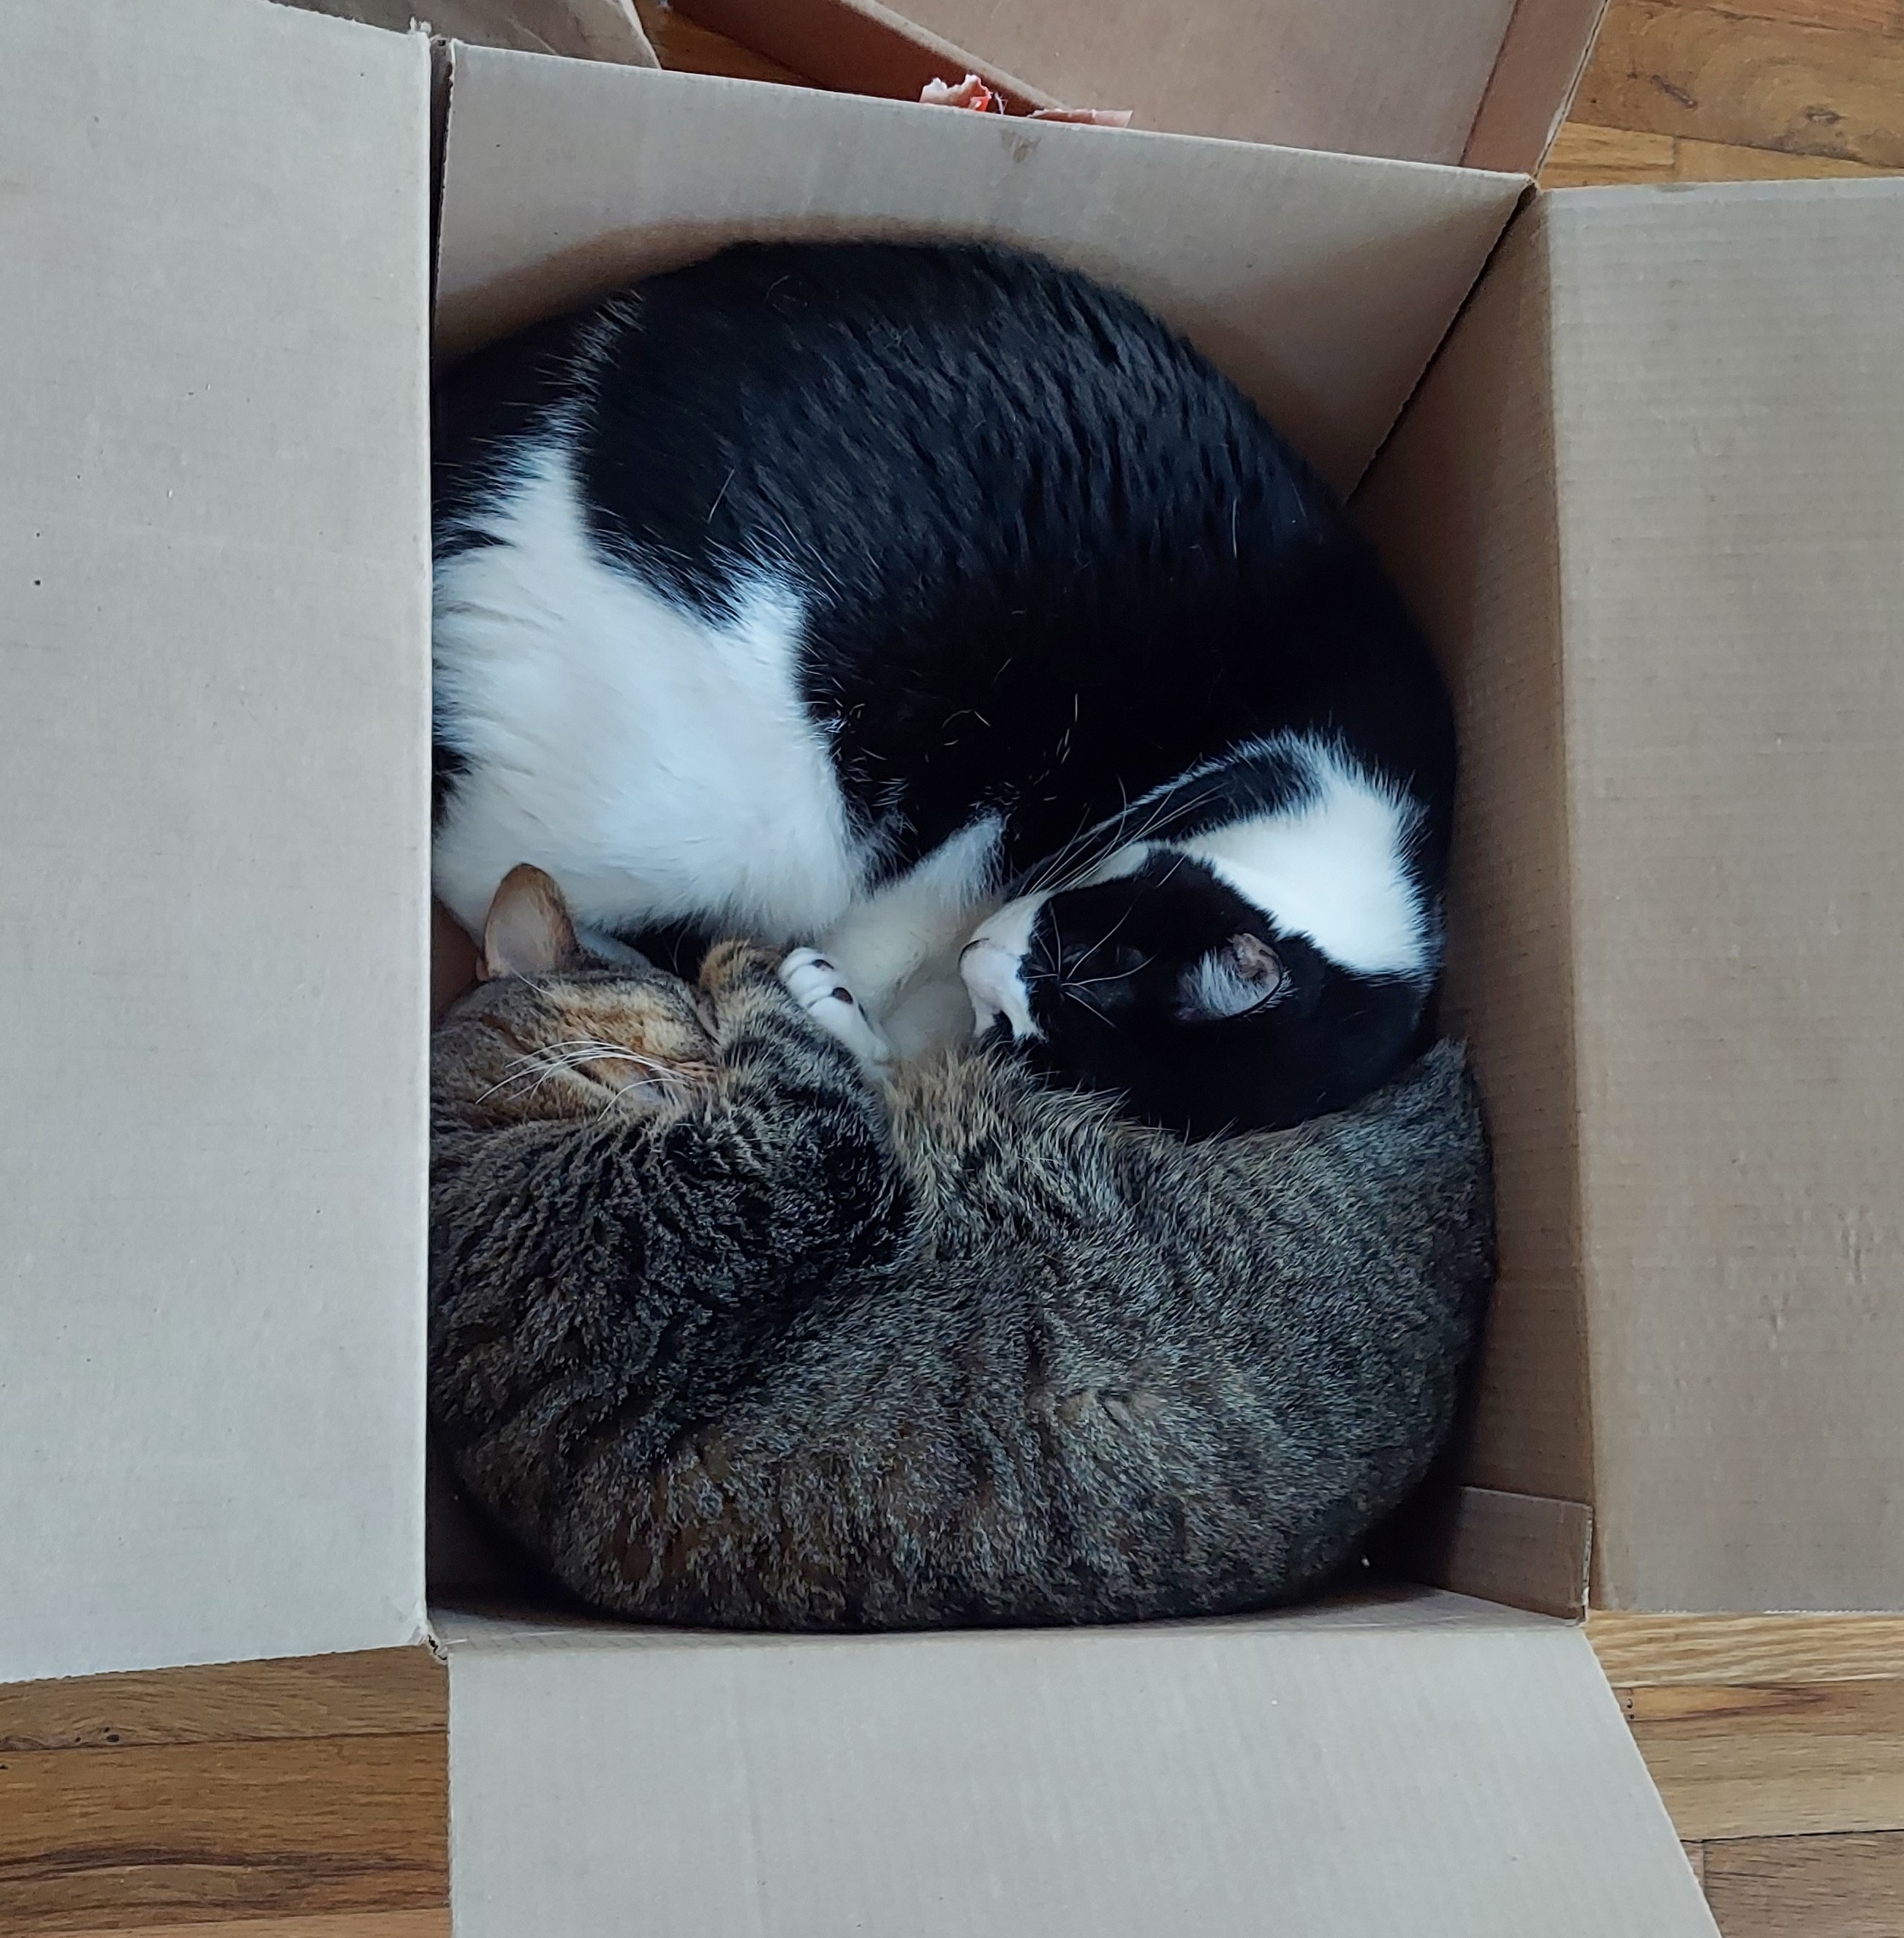 A black and white cat and a brown tabby cat curled up like a ying yang, asleep together in a cardboard box.